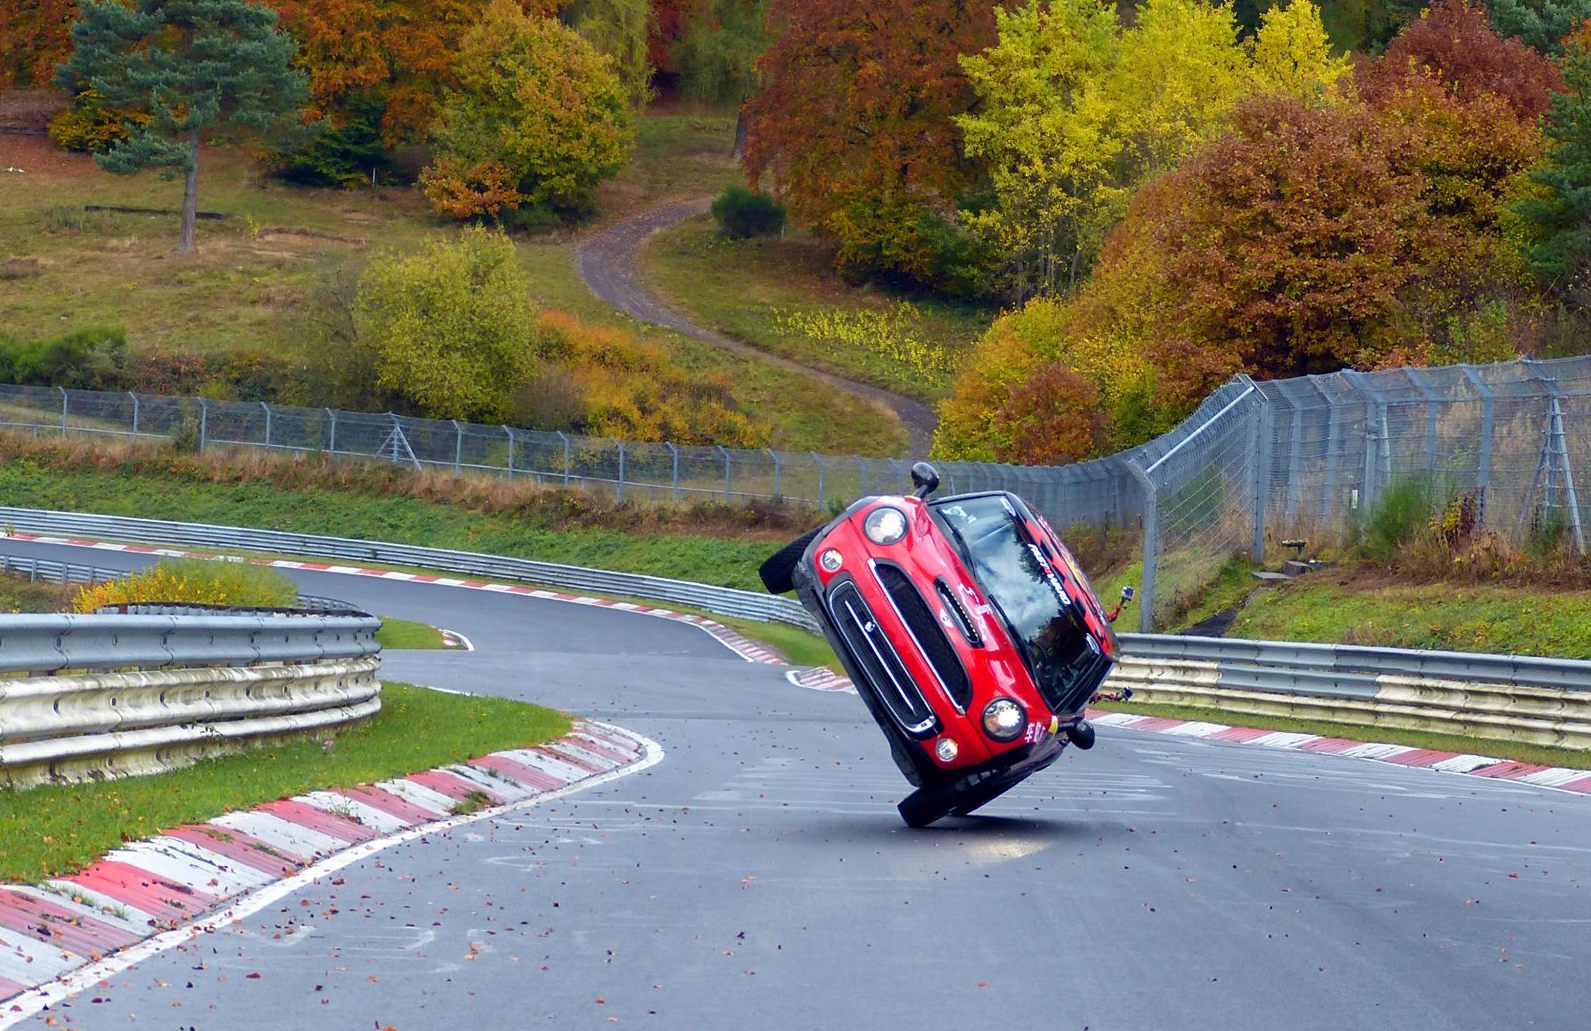 MINI Cooper laps Nurburgring on two wheels for record (video)